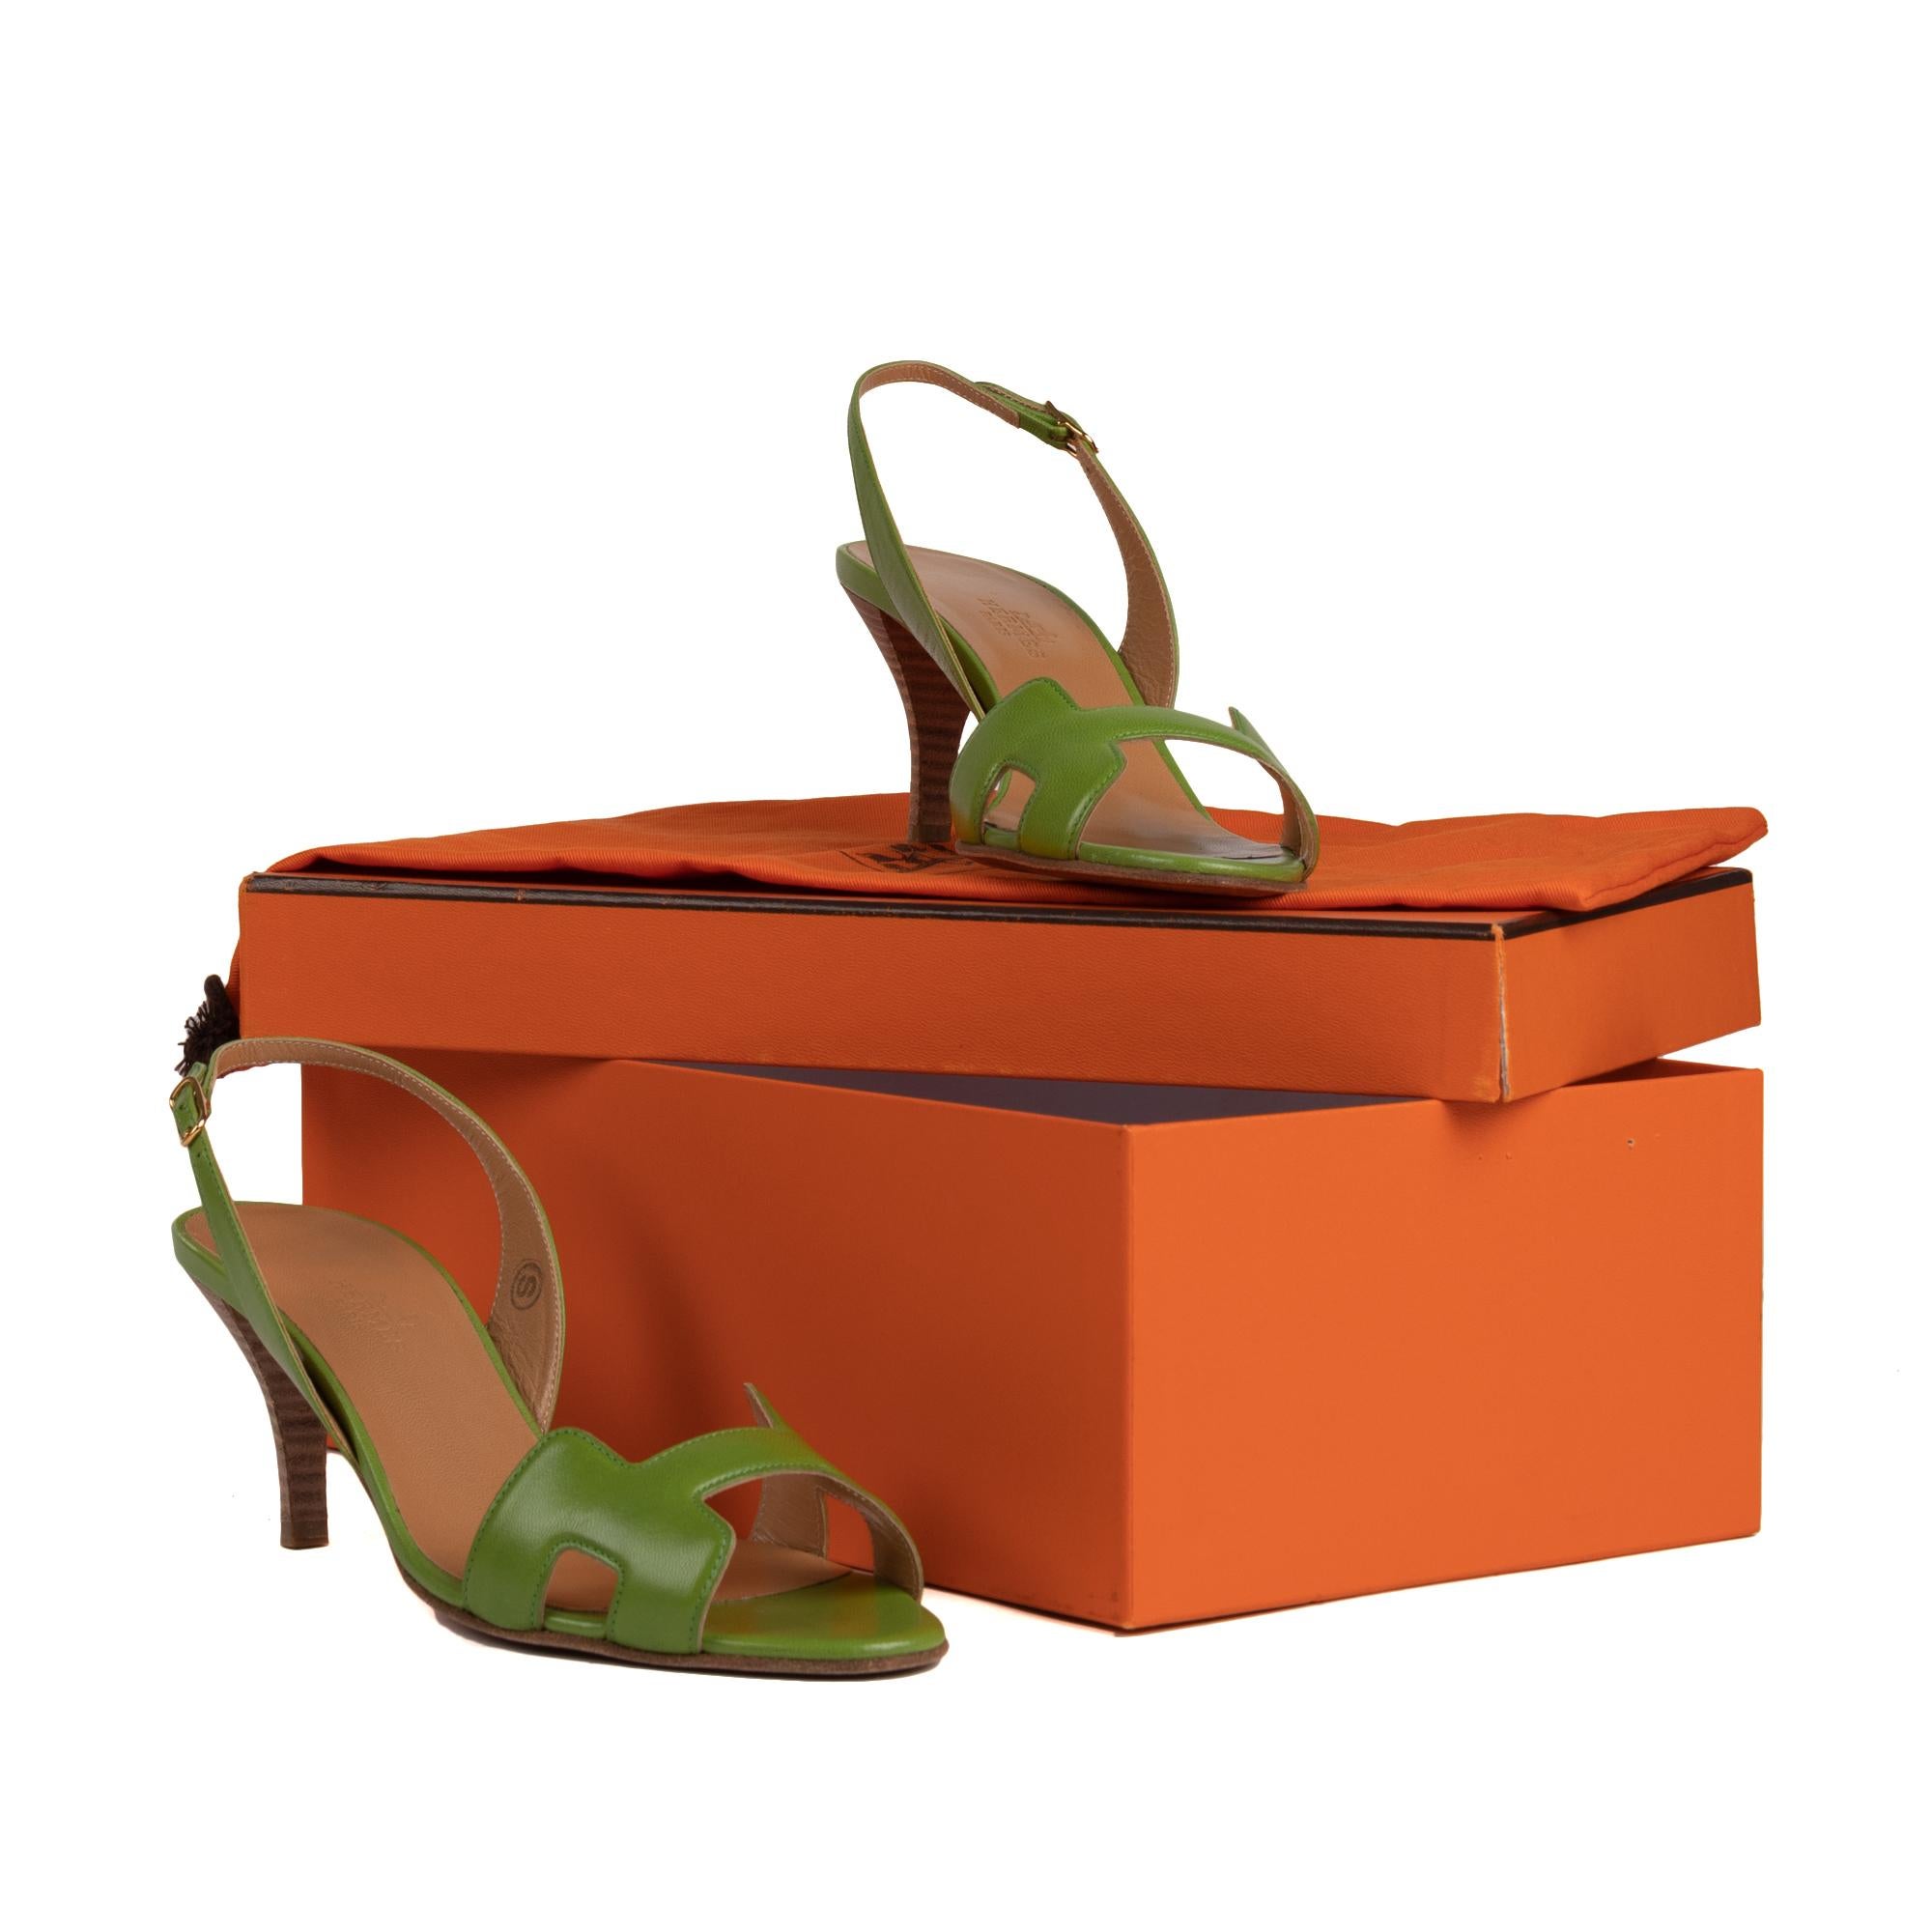 Hermès Night Sandals in green leather, size 36, 5, very good condition ! 4